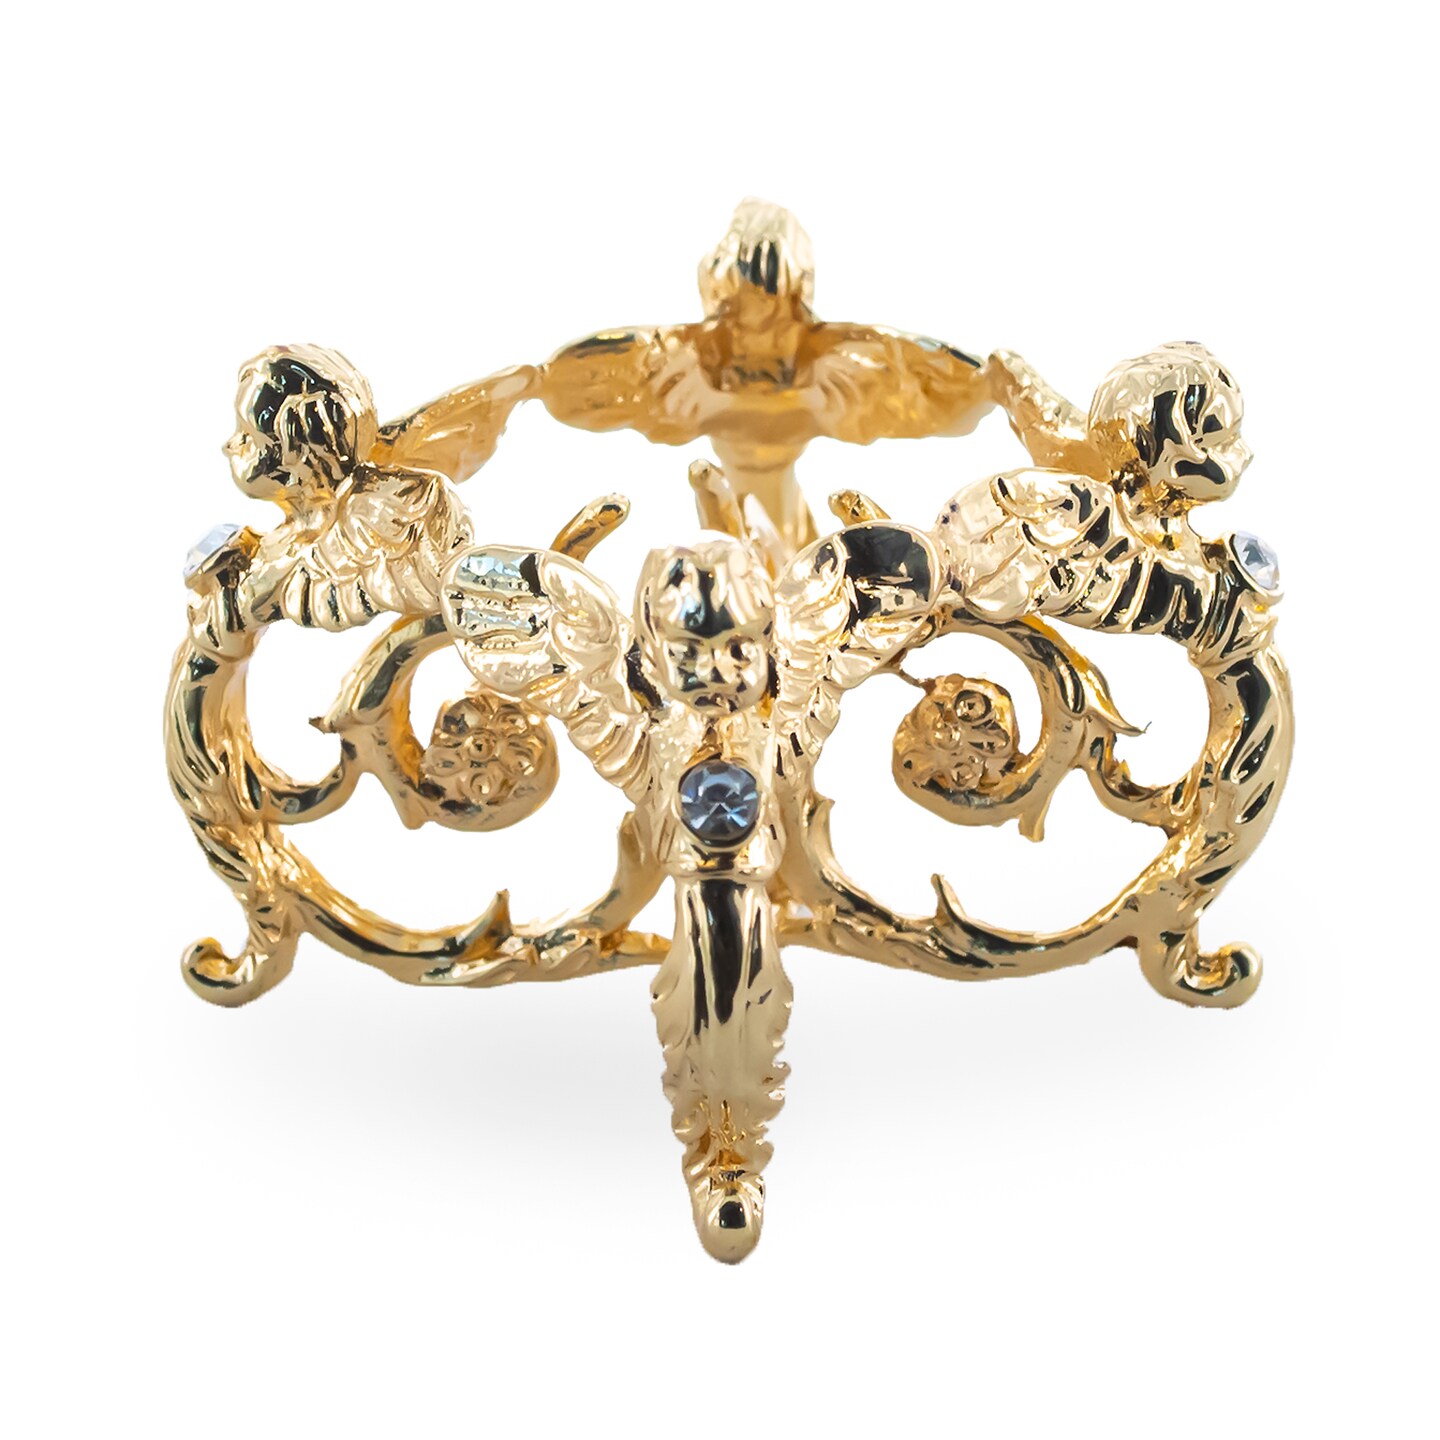 Angels with Jewel Gold Tone Metal Egg Stand Holder Display